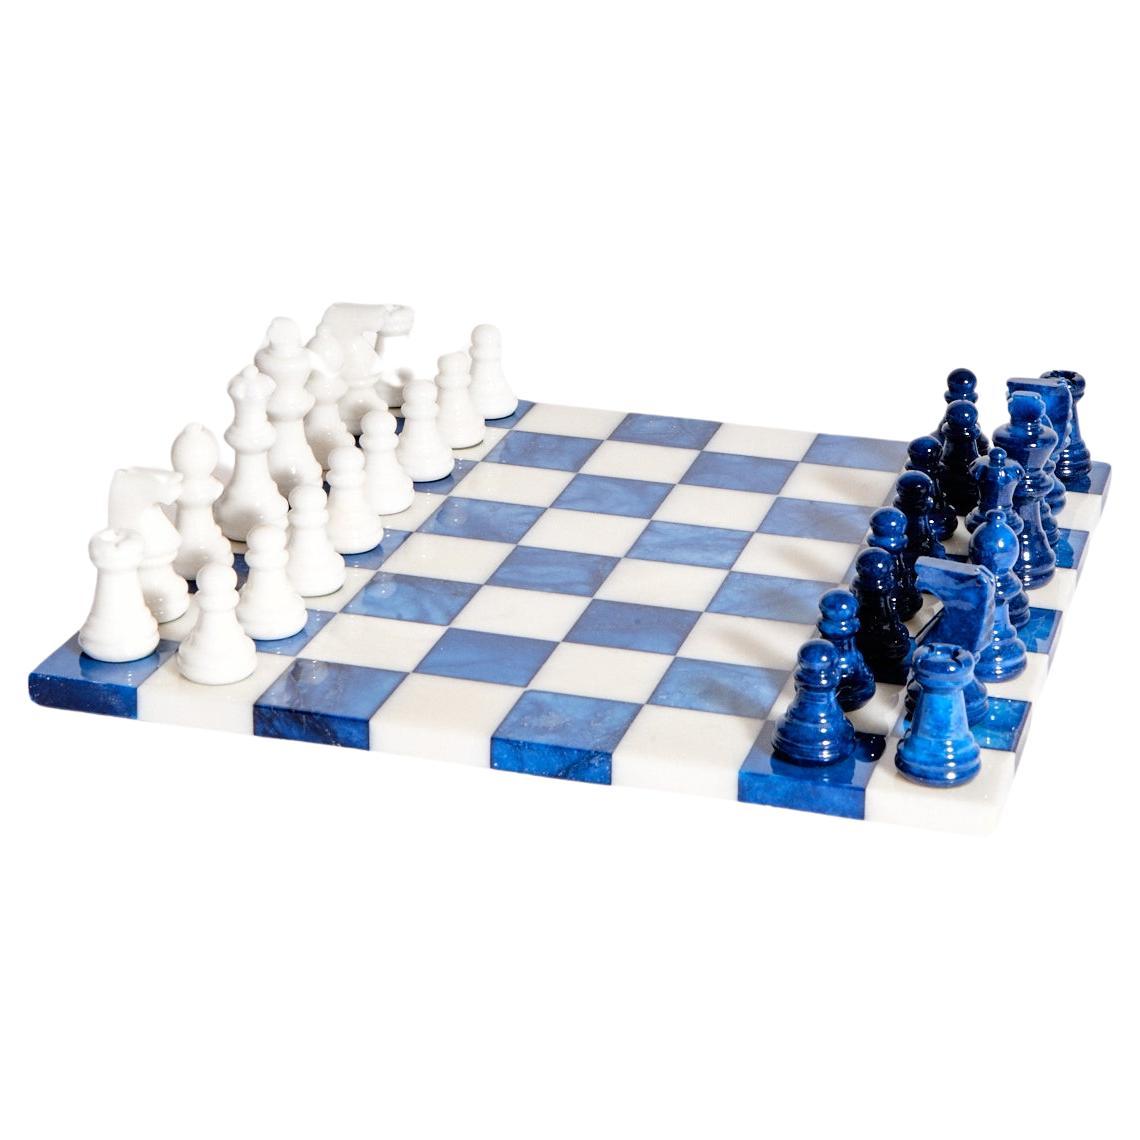 What is the name of the oldest European chess set?